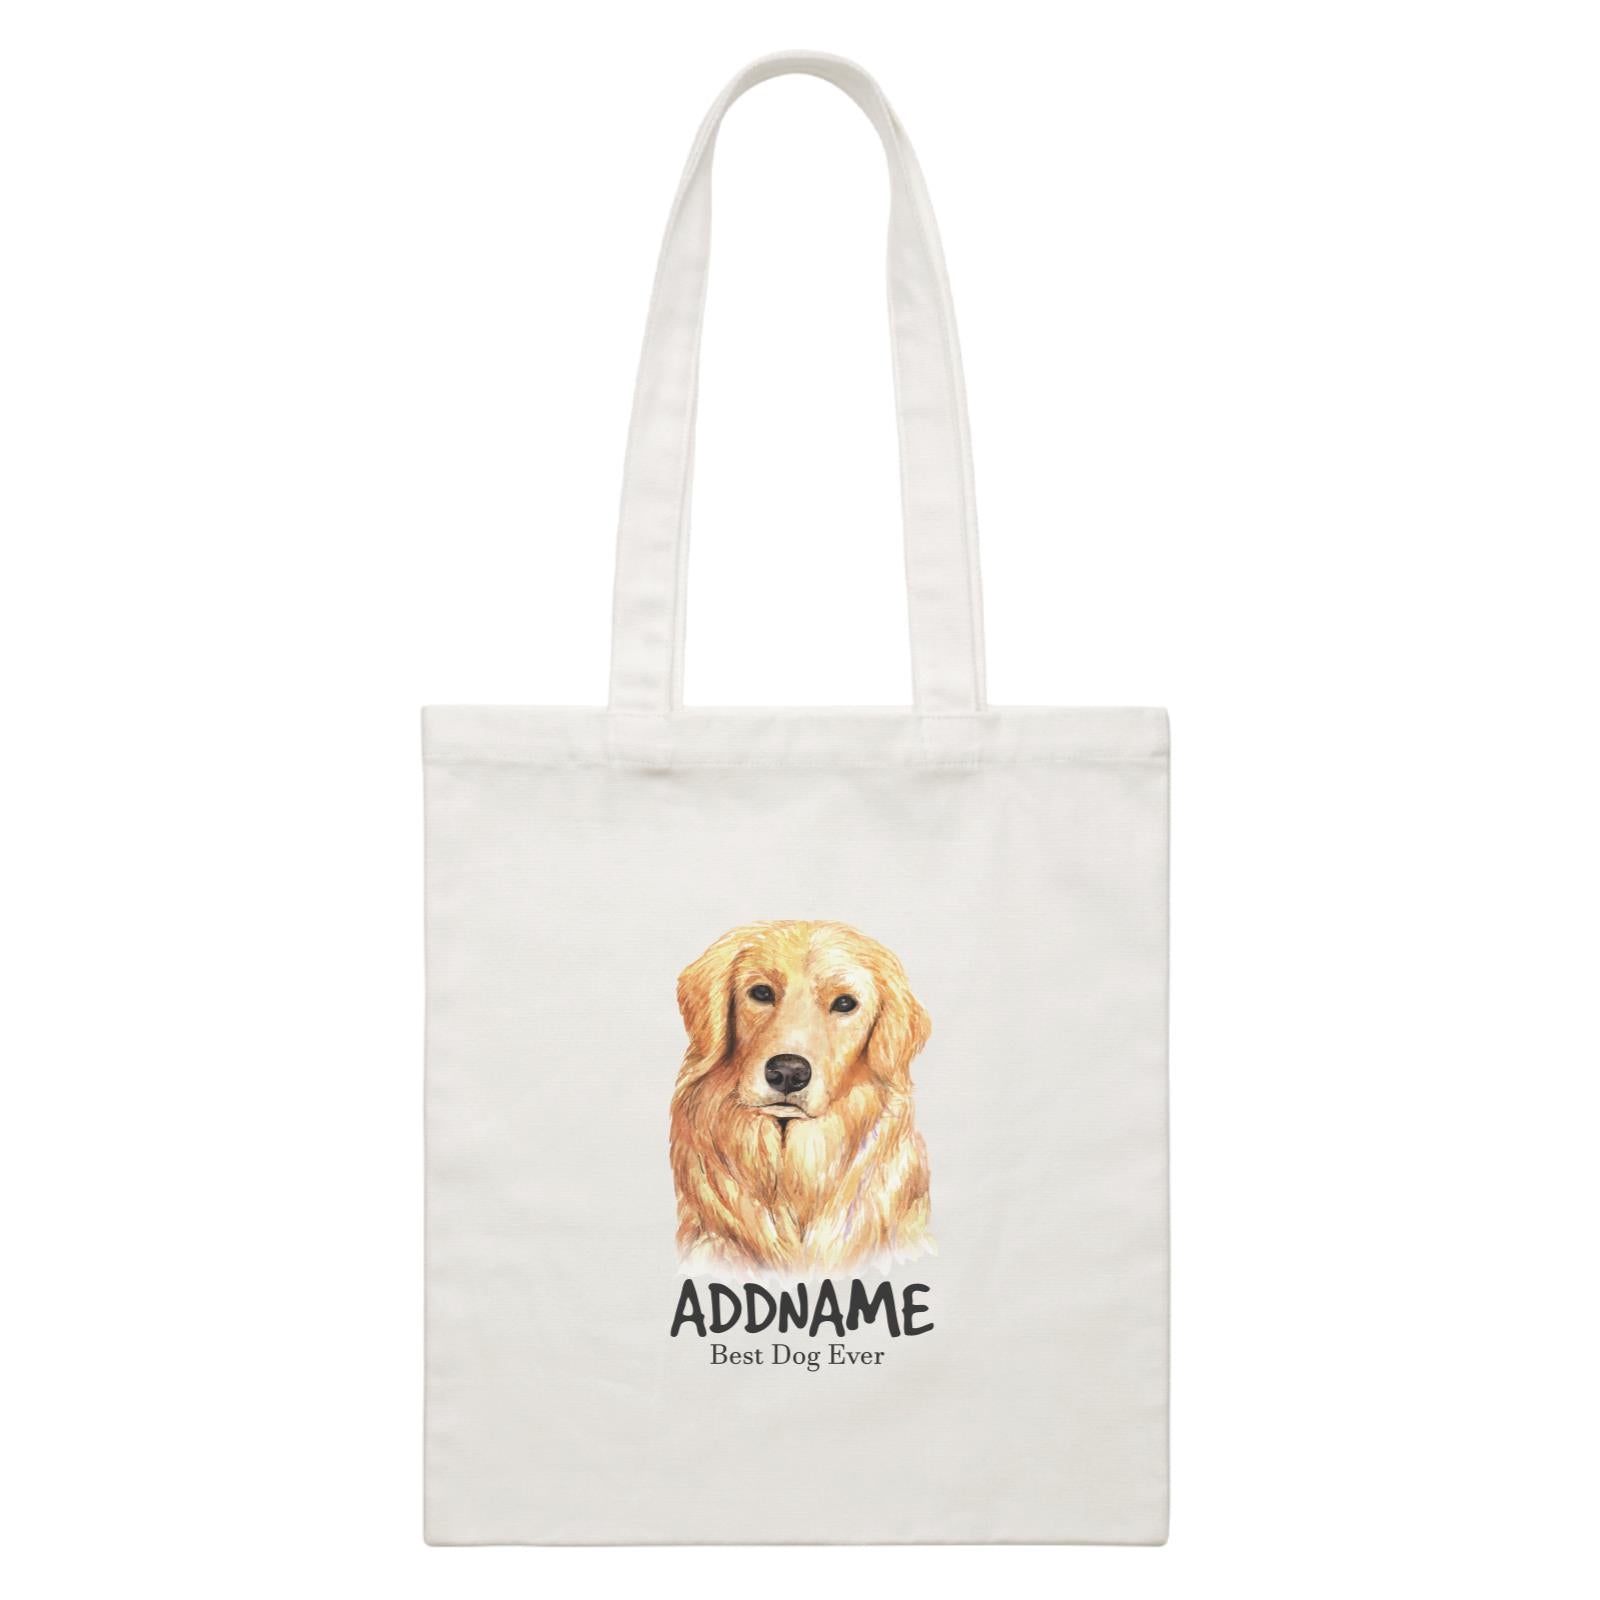 Watercolor Dog Golden Retriever Best Dog Ever Addname White Canvas Bag